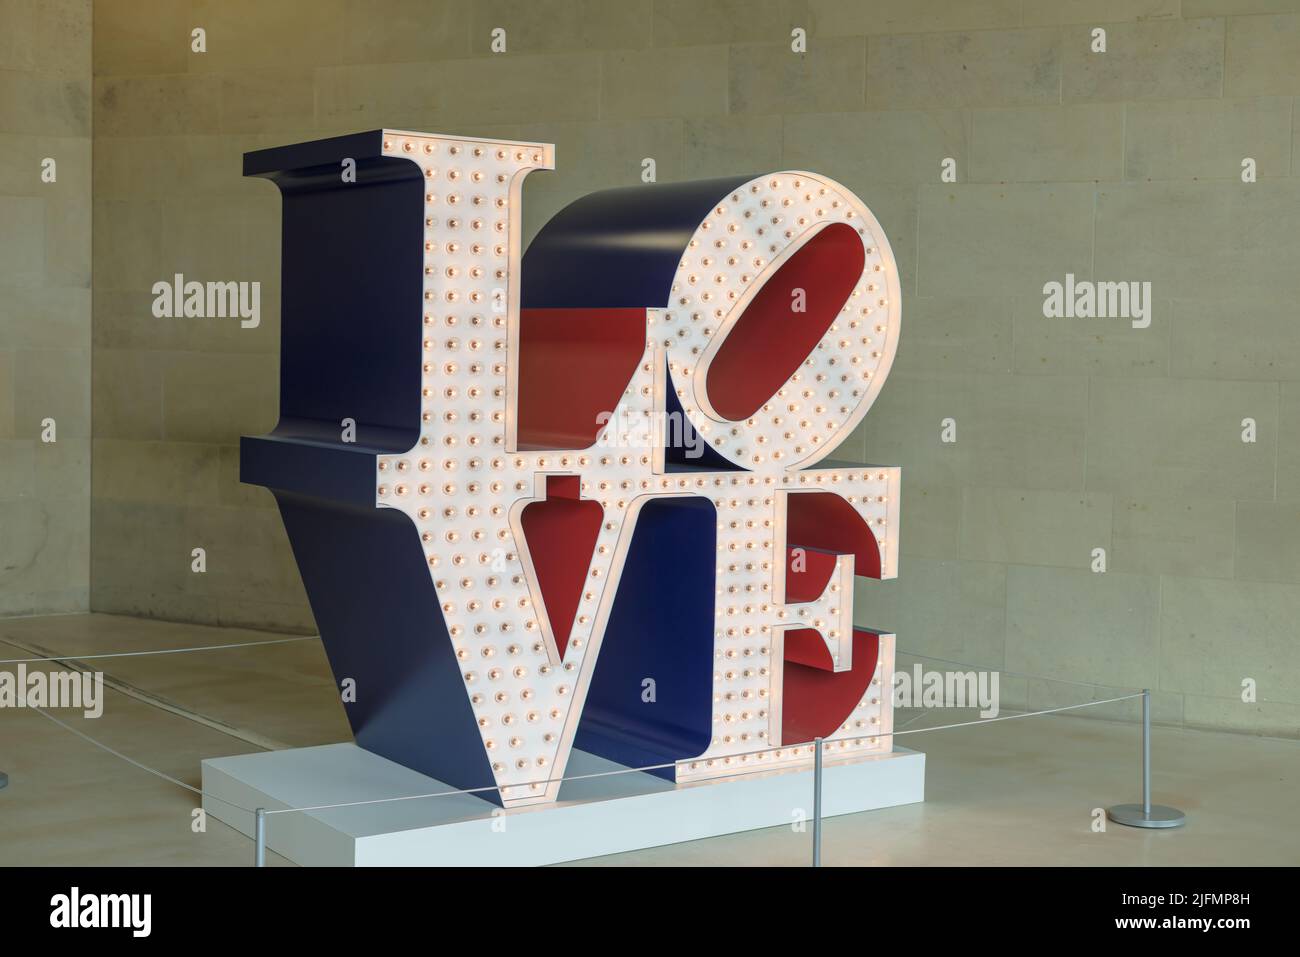 The Electric LOVE, 1966-2000 sculpture by Robert Indiana as displayed Yorkshire Sculpture Park, Wakefield, UK. Stock Photo